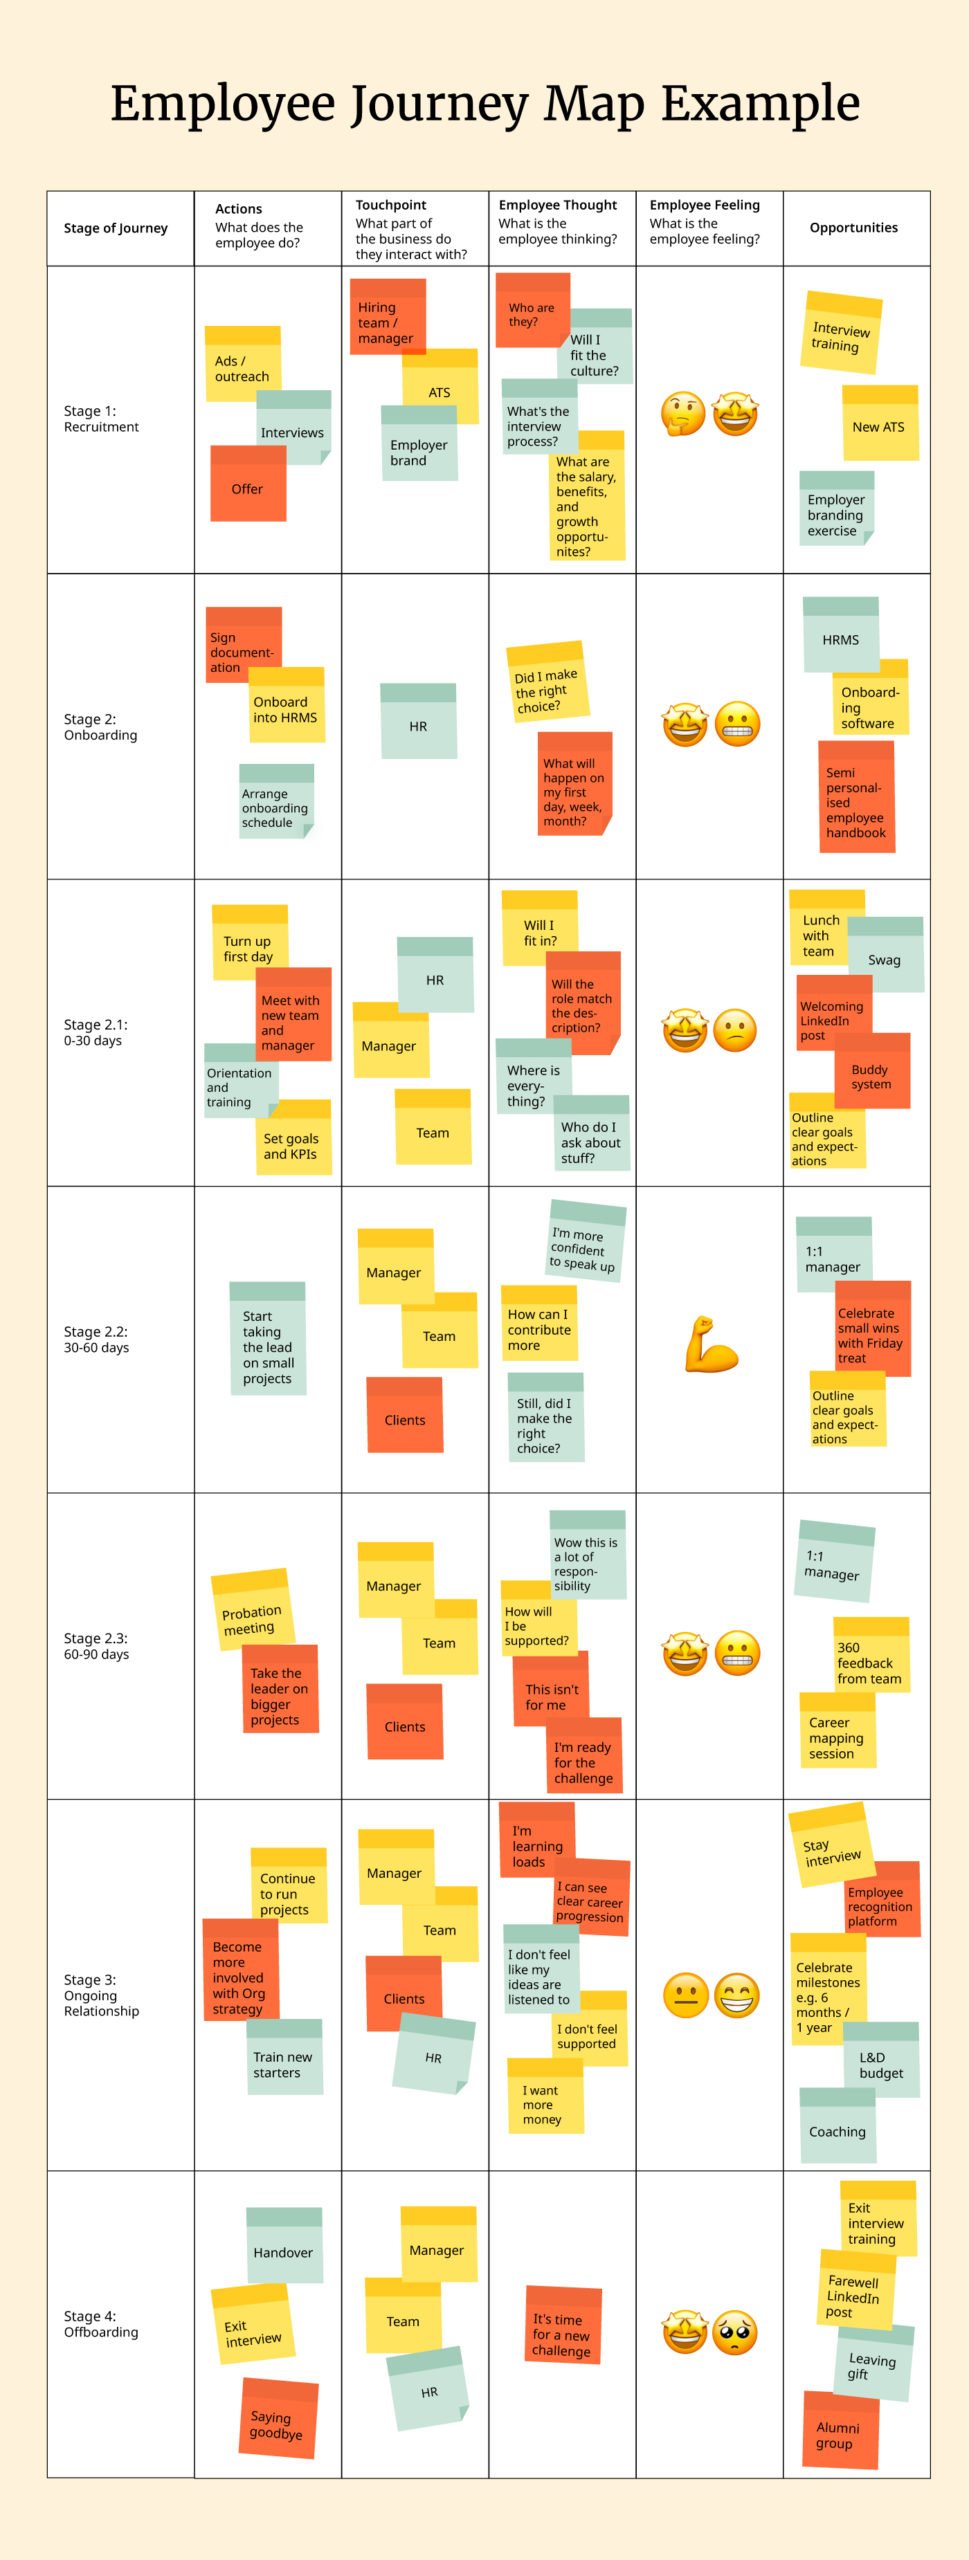 Employee journey mapping example for onboarding.